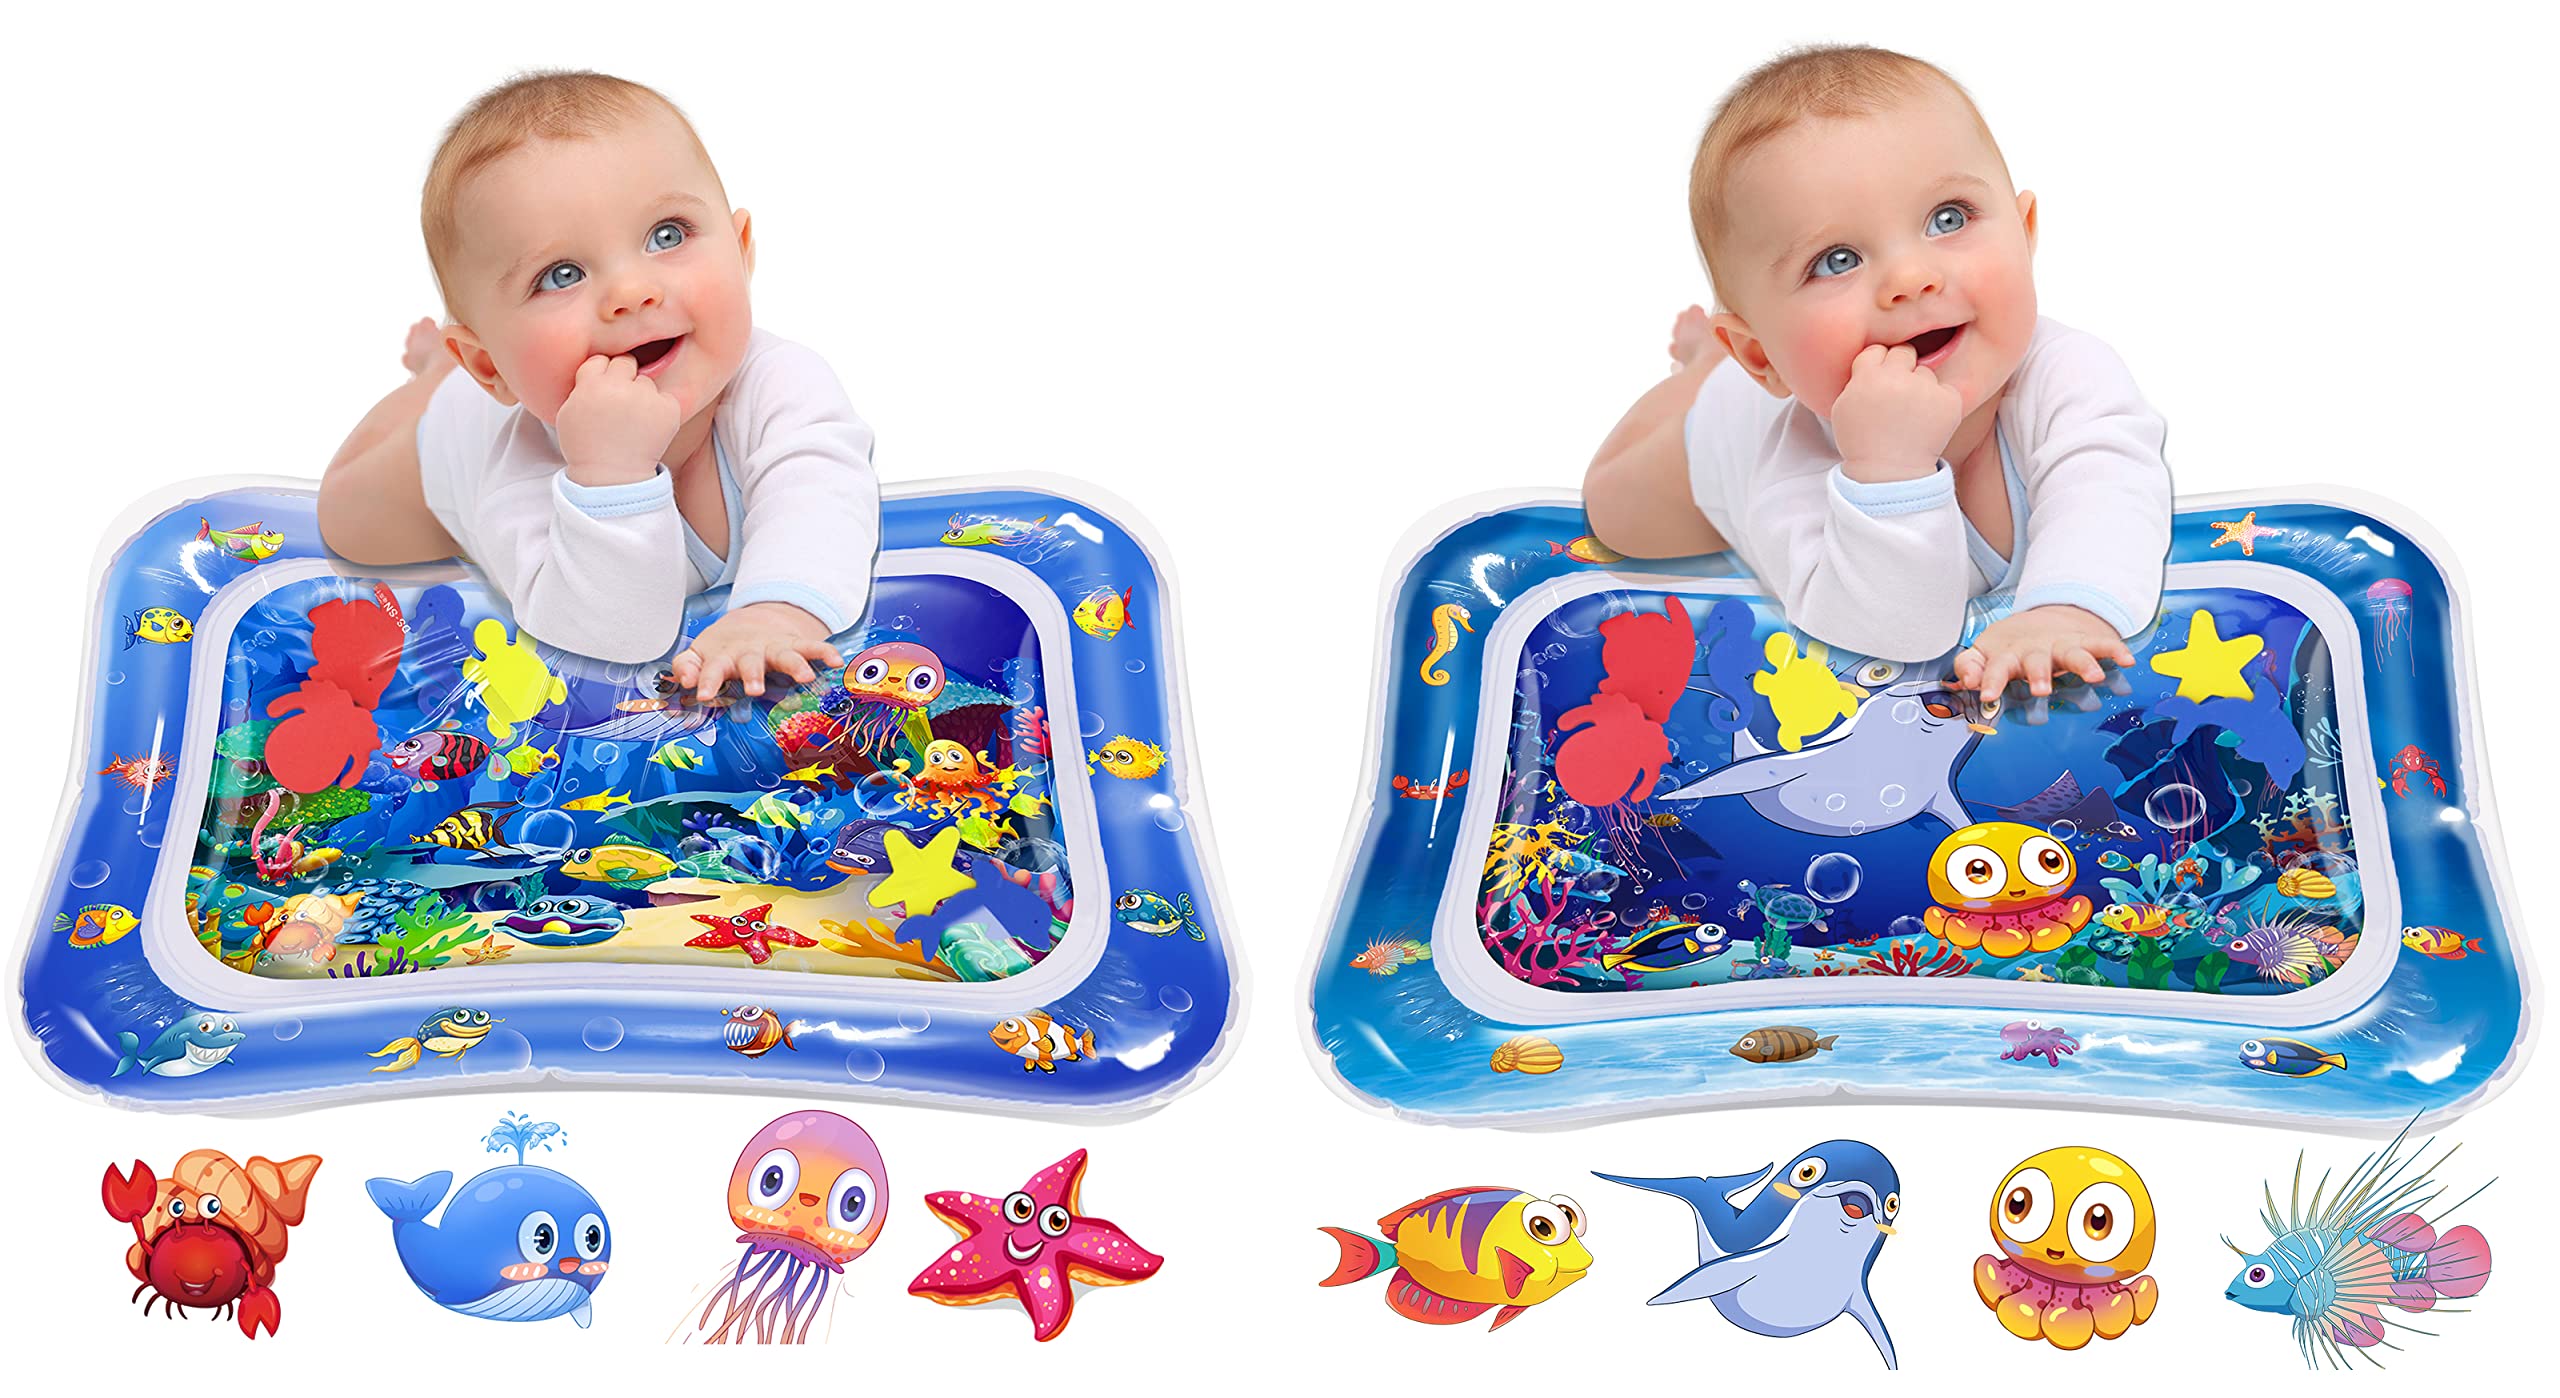 Infinno Tummy Time Mat Premium Baby Water Play Mat for Babies, Baby Toys for 3 to 24 Months, Blue Whale Style and Yellow Octopus Style